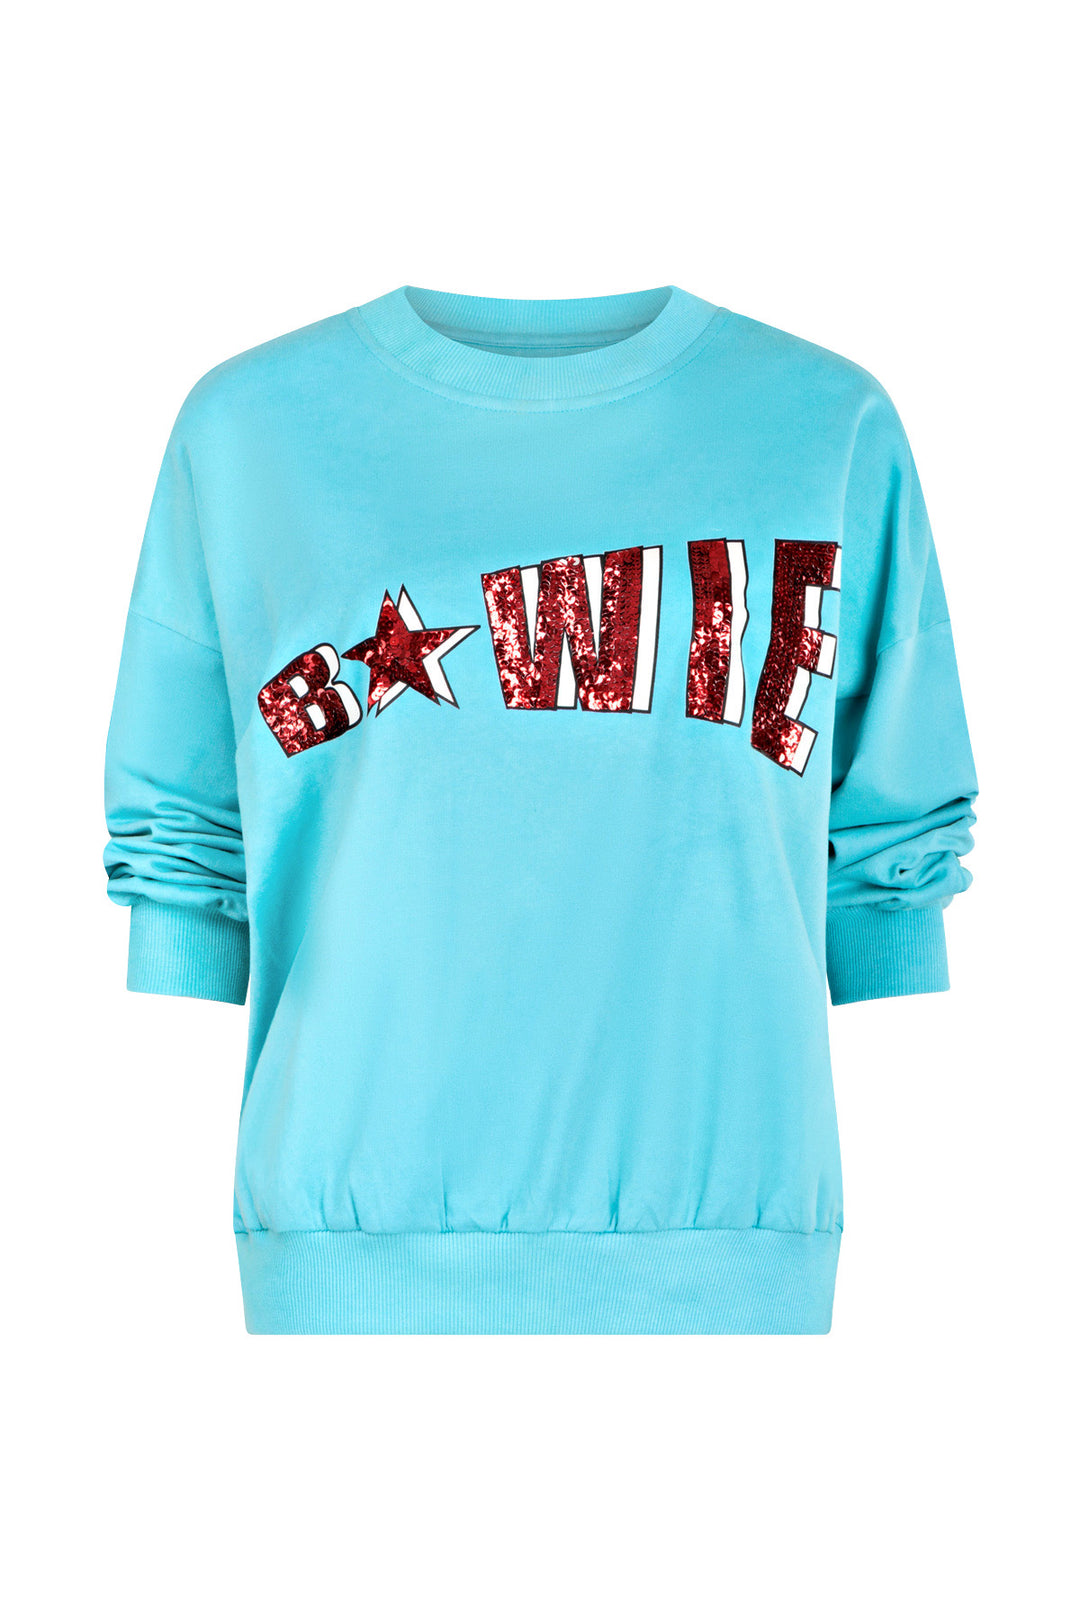 Bowie Forever Sweatshirt by Bonita Collective